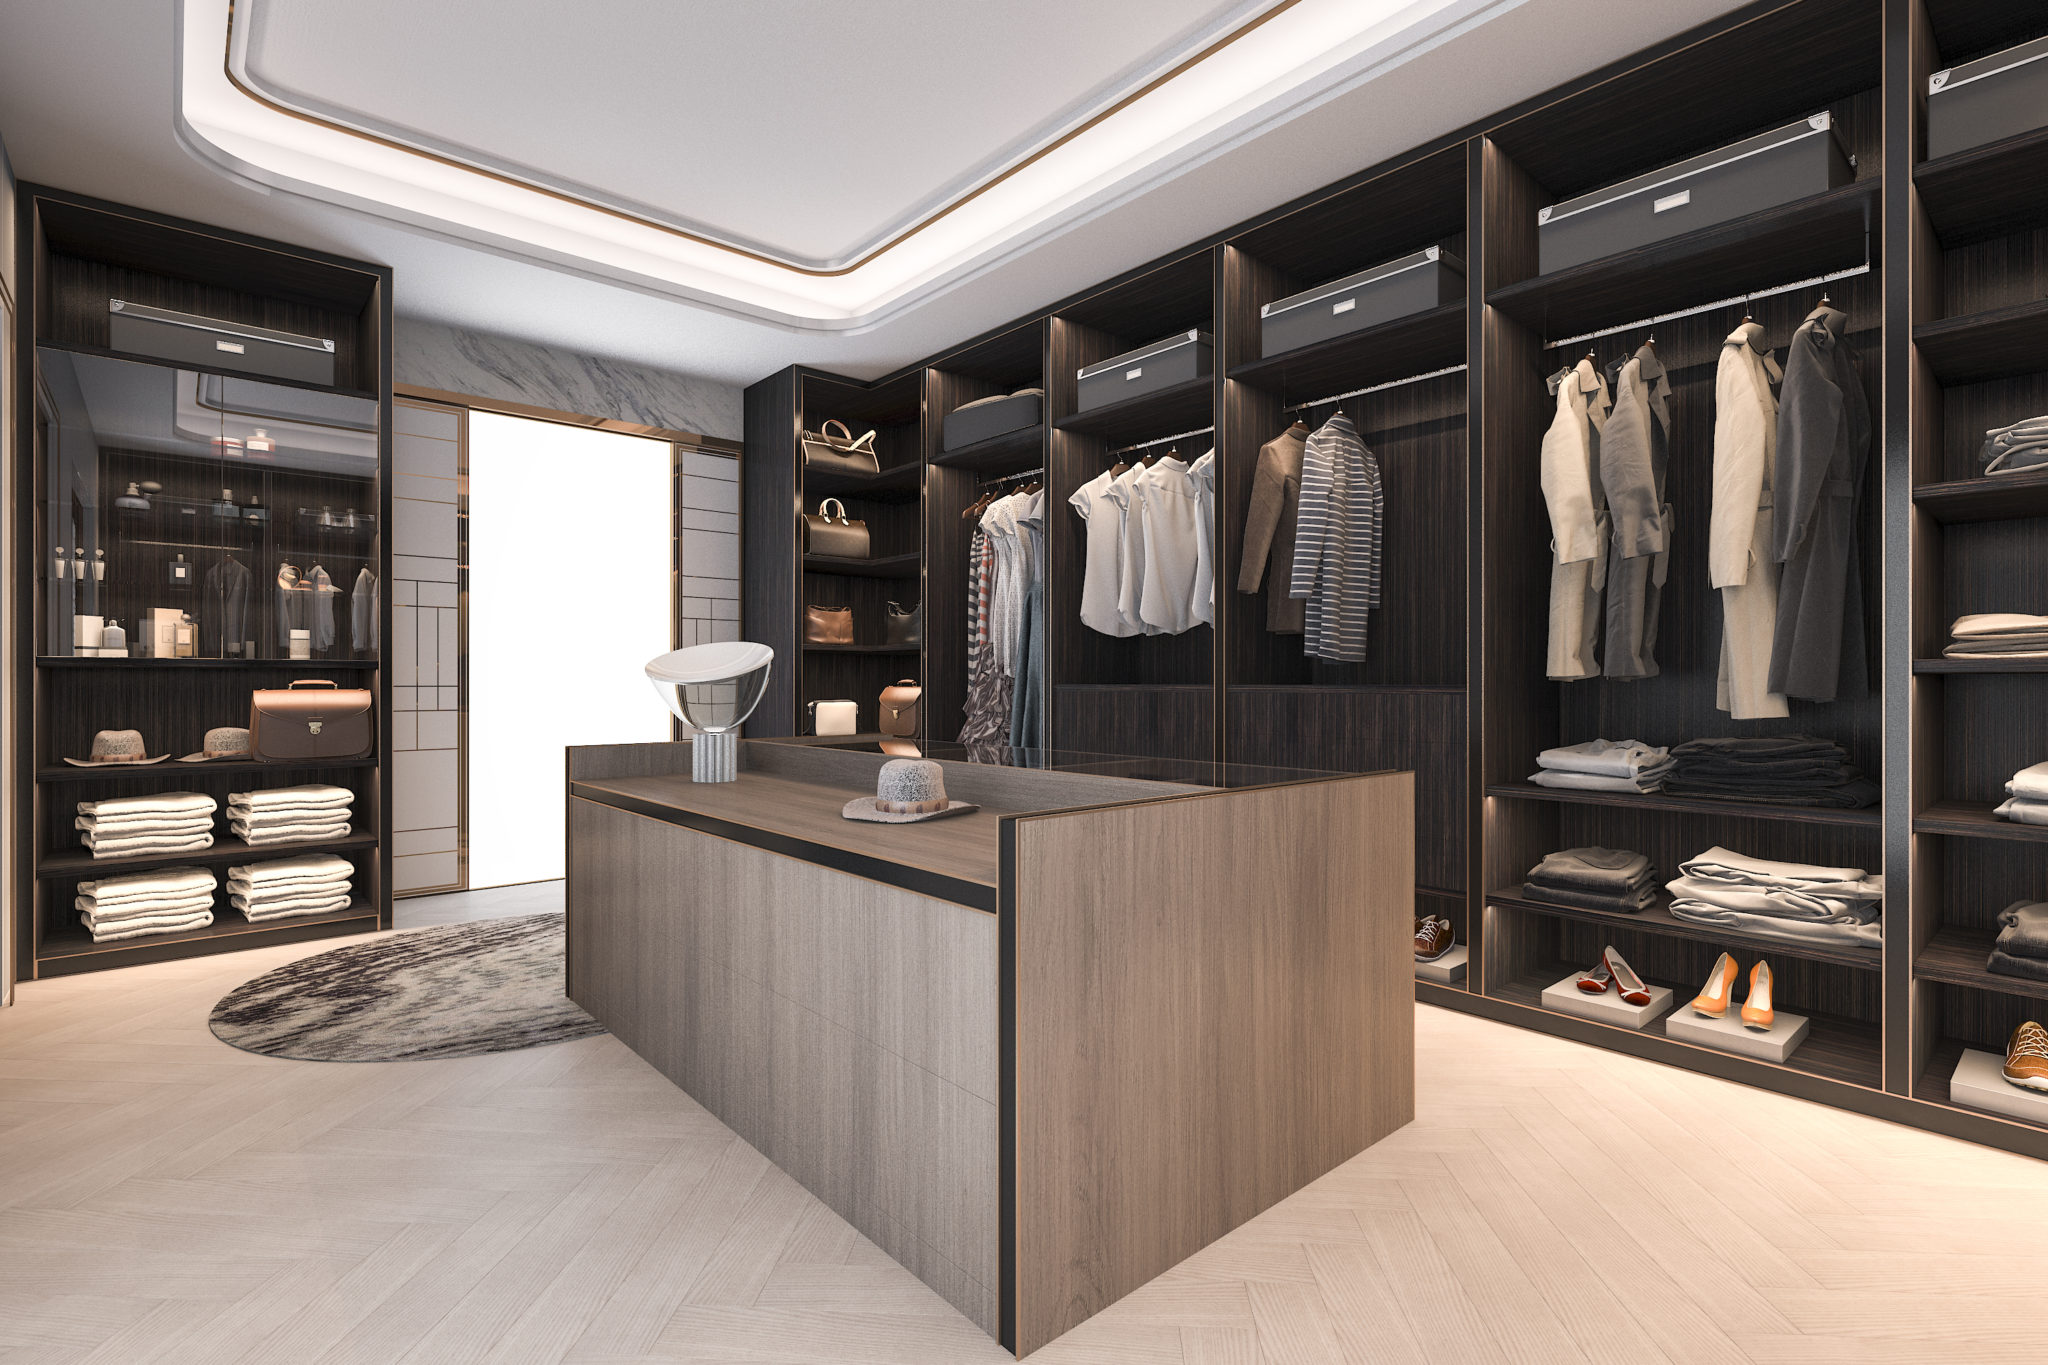 Make Your Home Luxurious with A Walk in Closet